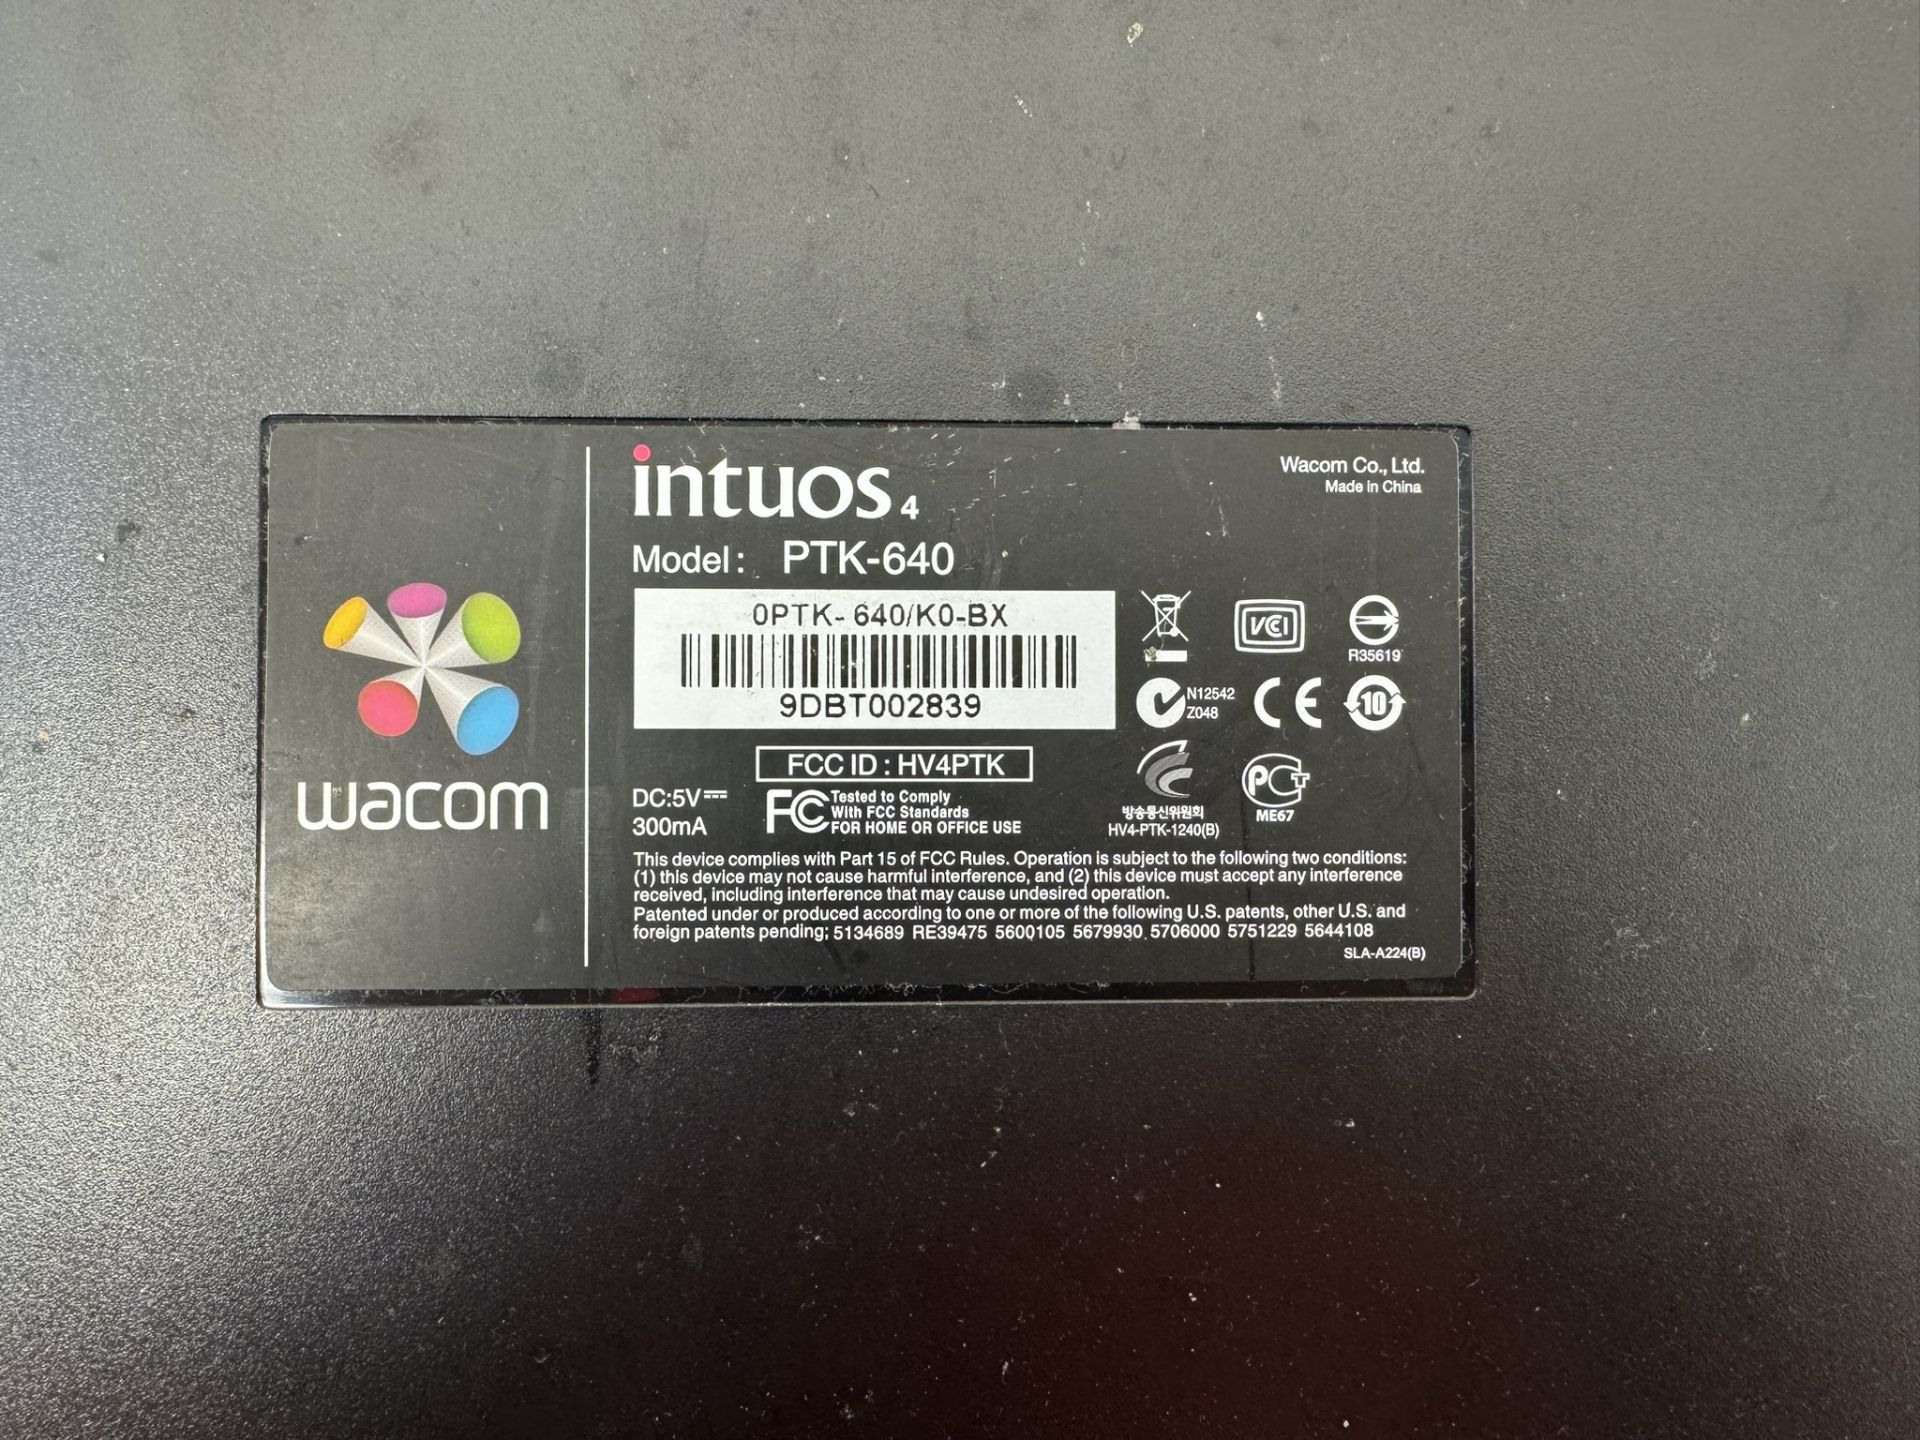 Wacom Intuos4 PTK-640 Medium A5 Graphics Tablet with Pen - Image 4 of 6